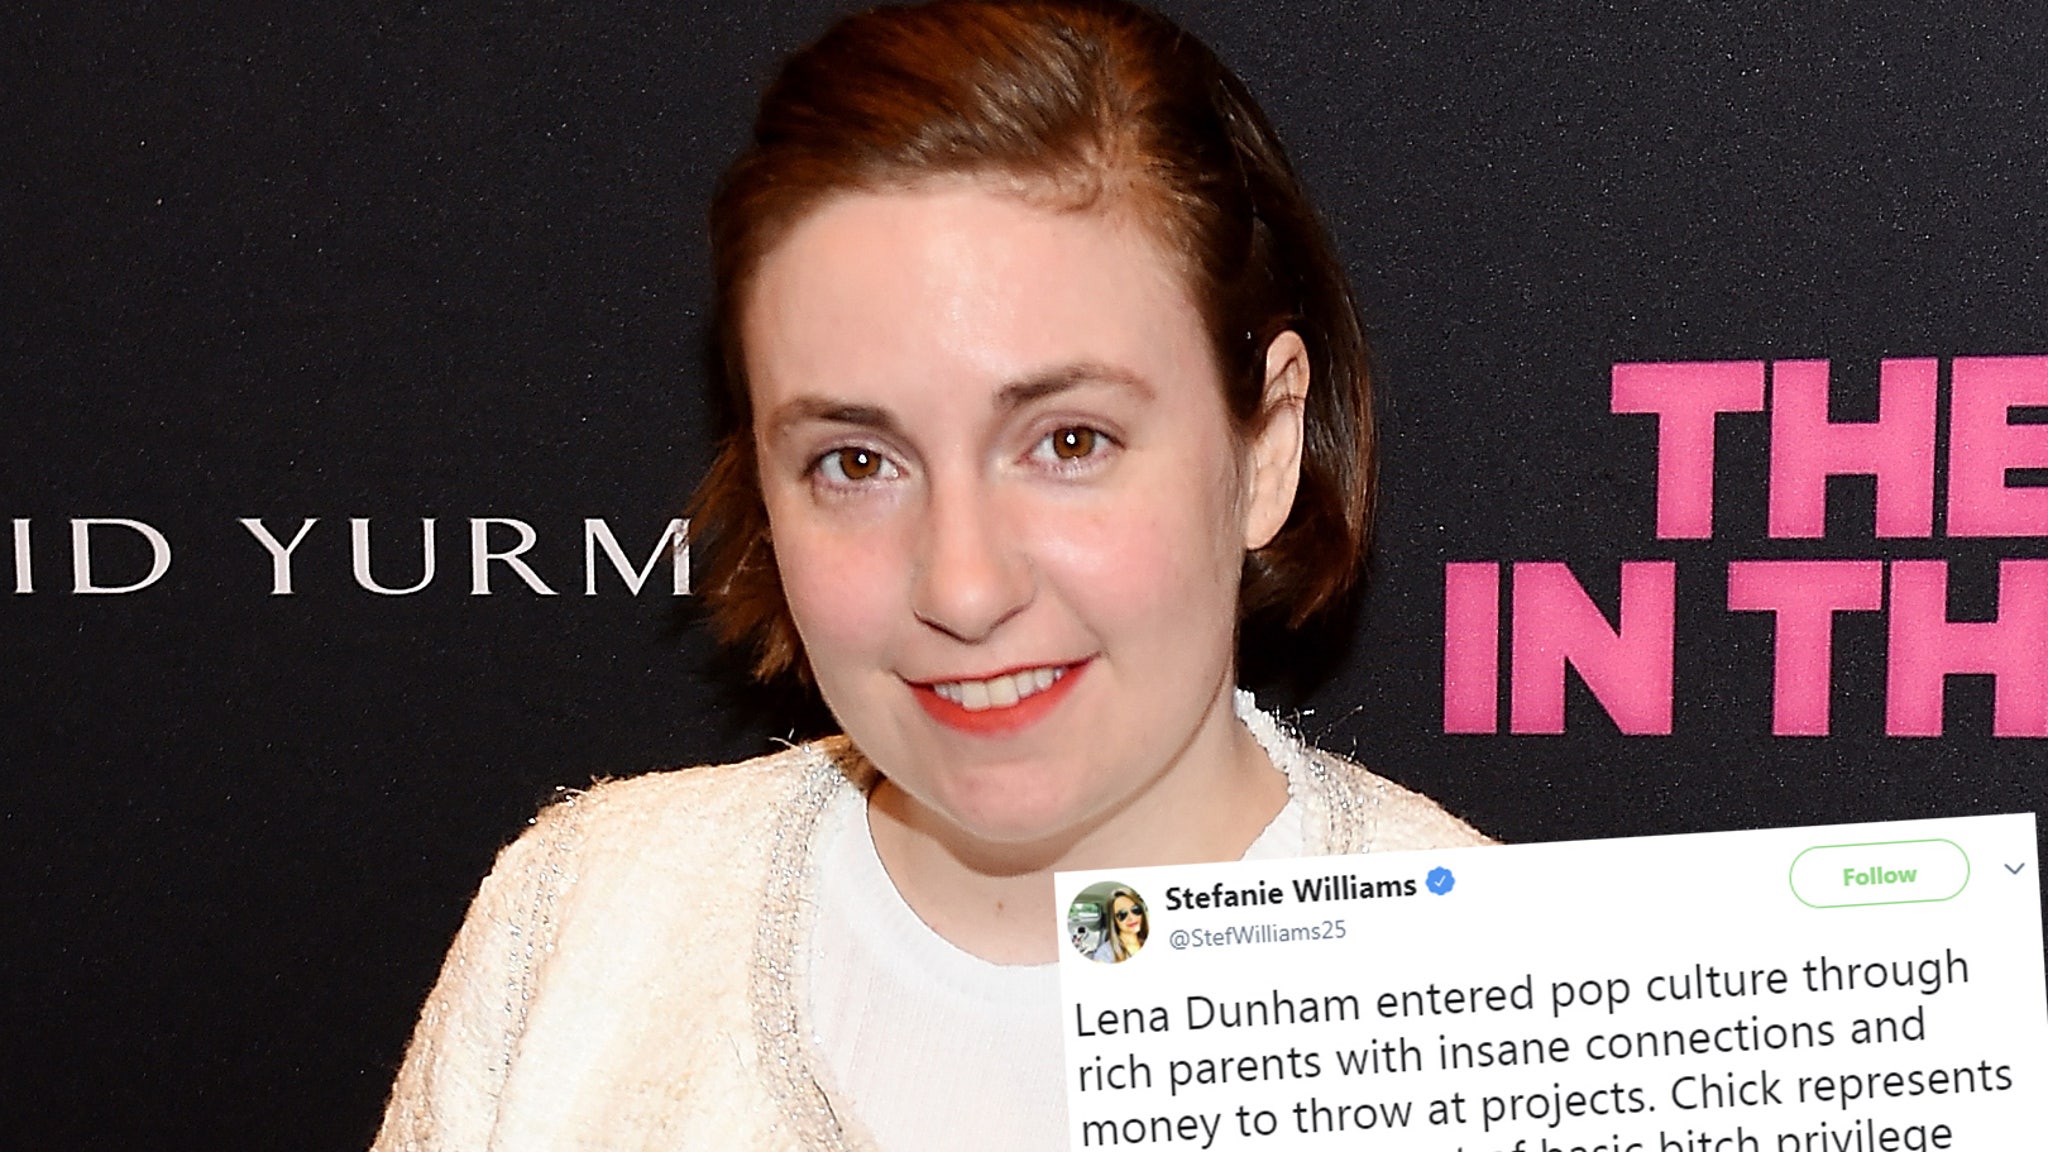 Lena Dunham Fires Up Haters By Explaining Why She Thinks So Many People 